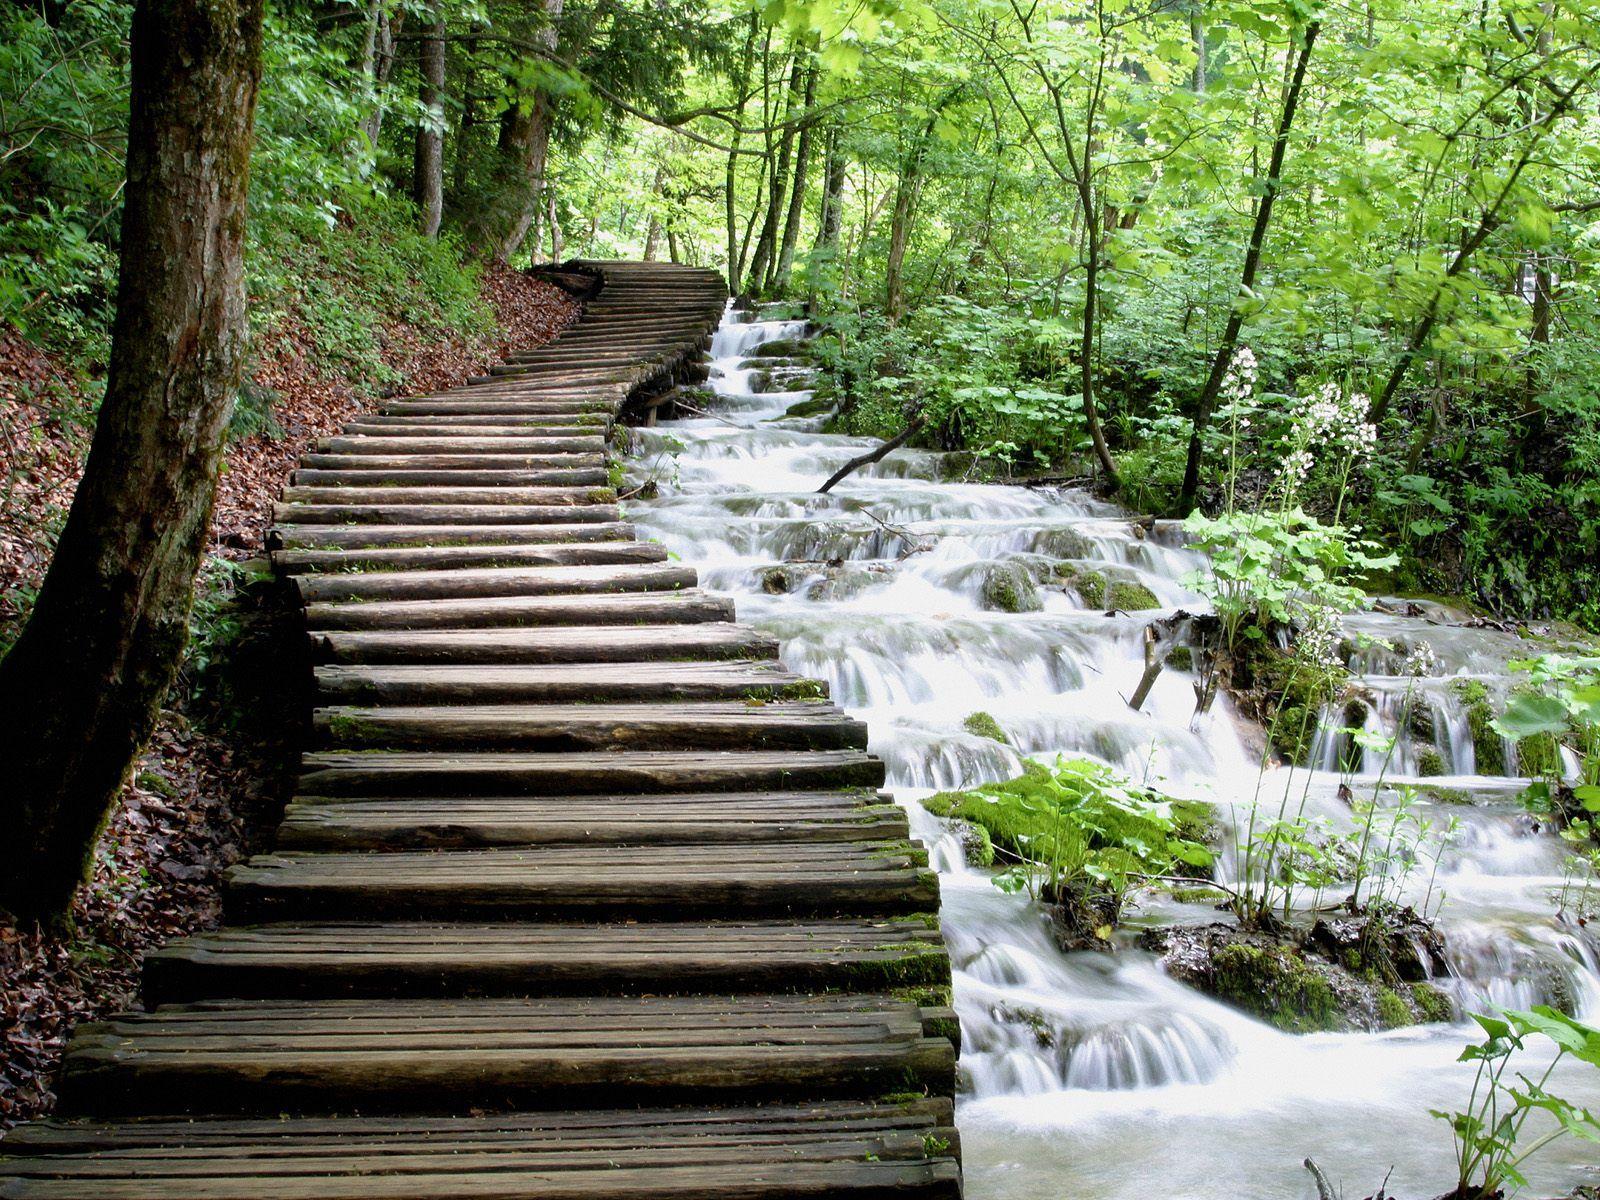 Croatia's Plitvice Lakes, 16 lakes in the mountains covered